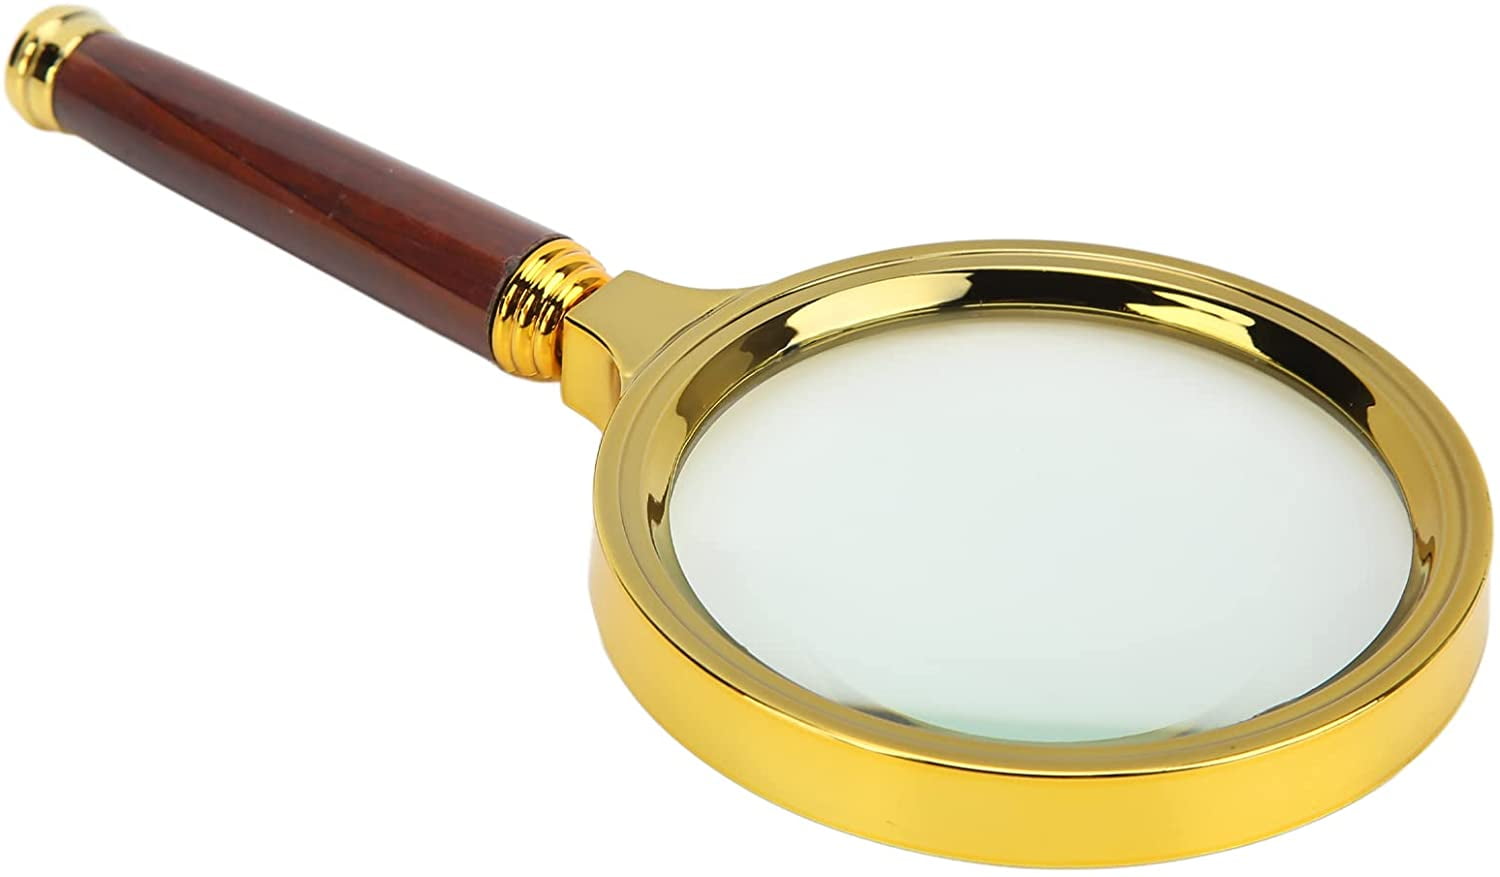 KEMAXI Magnifying Glass,5X Handheld Magnifier with Large Glass Lens and Metal Handle, Magnifying Glasses for Reading, Close Work, Hobbies, Inspection